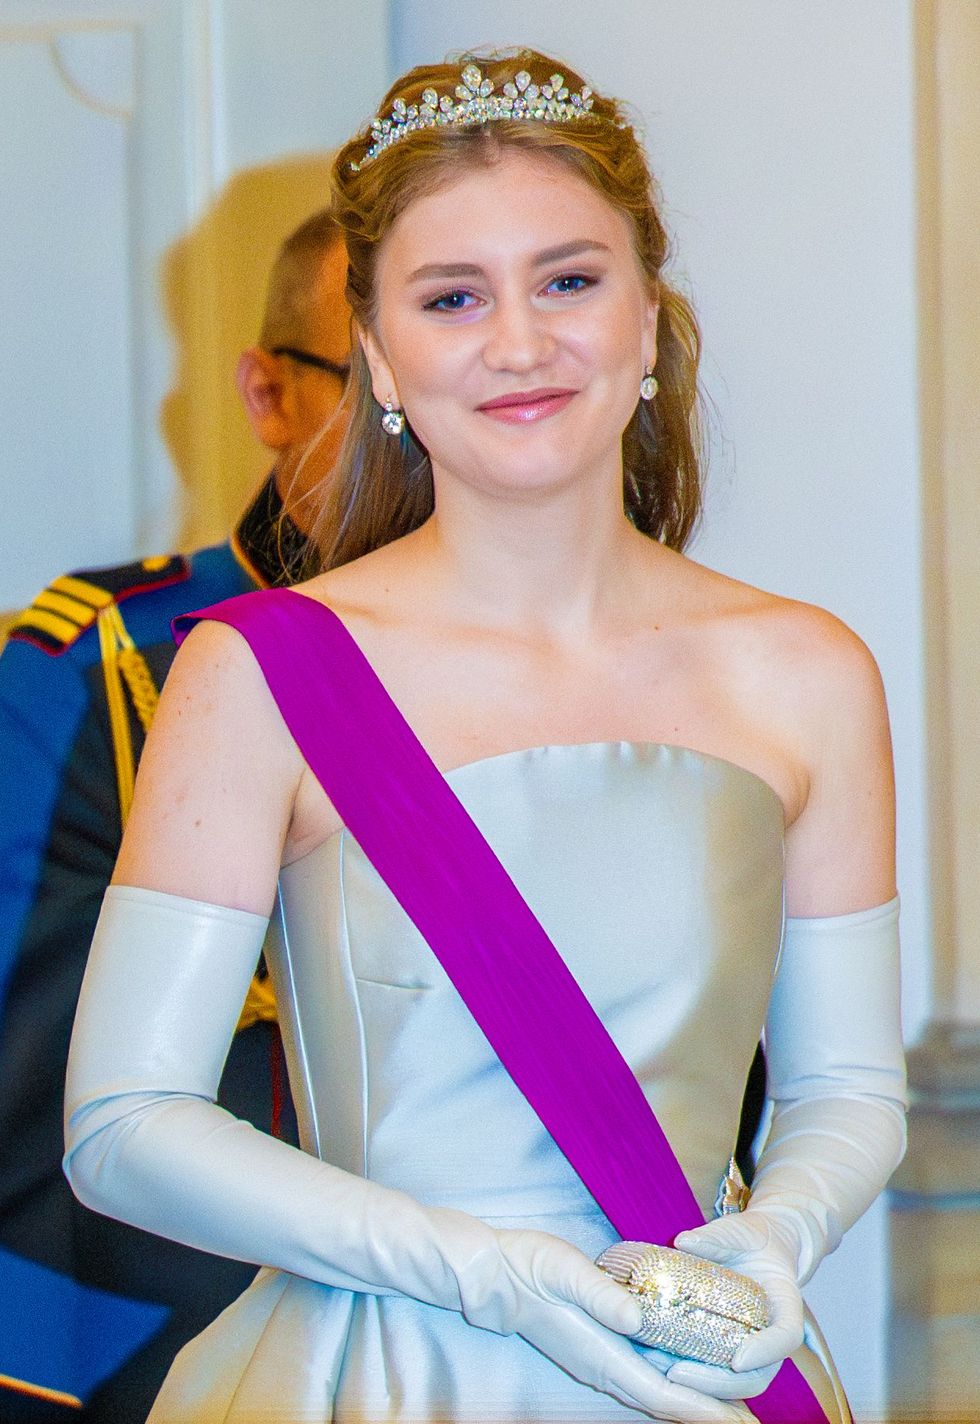 point de vue out mandatory credit photo by shutterstock 14150751lt princess elisabeth of belgium during a gala dinner on the occasion of the 18th birthday celebrations of the danish prince at christiansborg palace in copenhagen, denmark prince christian of denmark celebrates 18th birthday, copenhagen, denmark 15 okt 2023